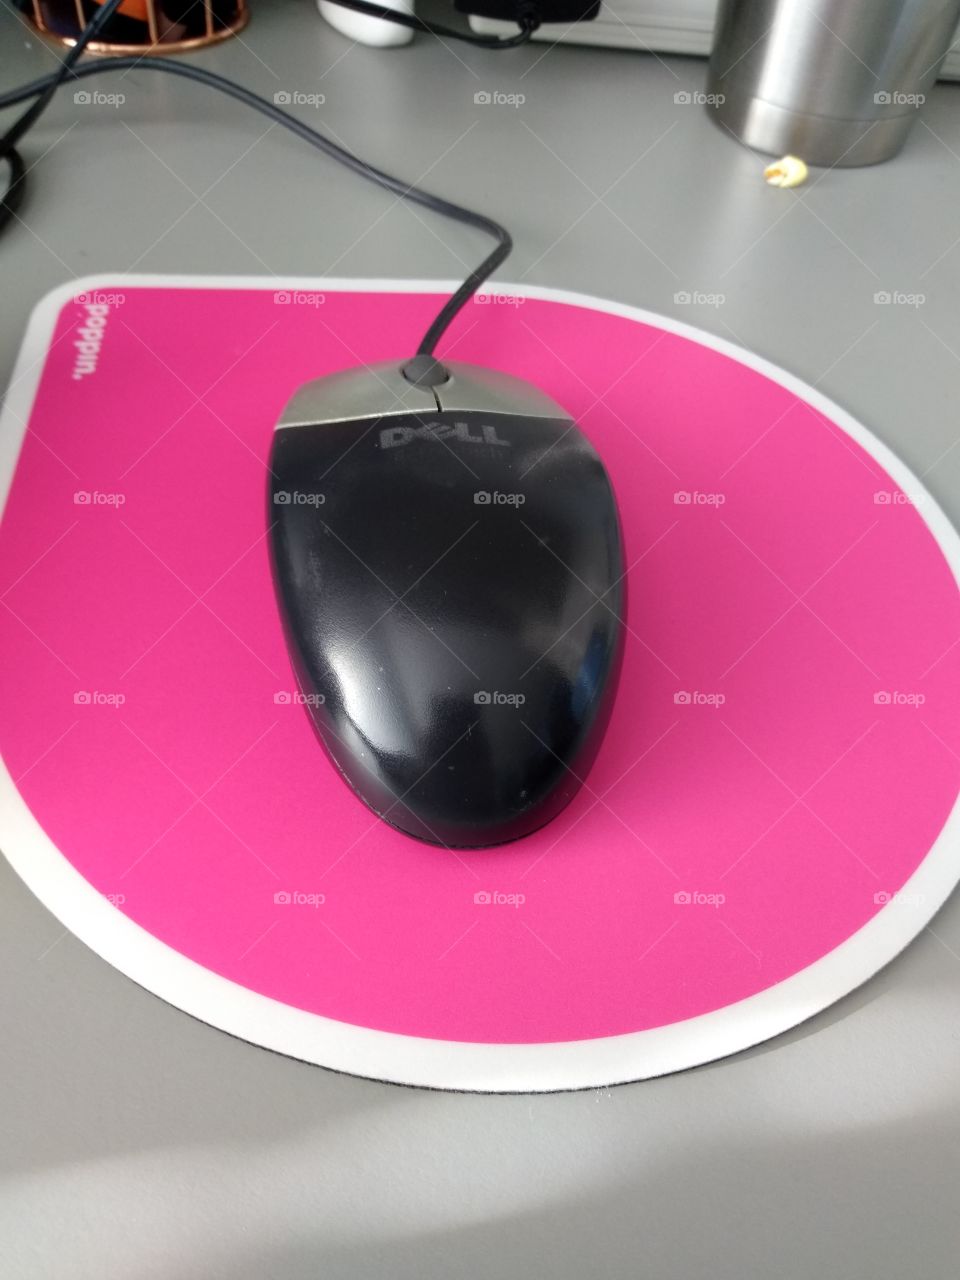 USB mouse on pink mousepad